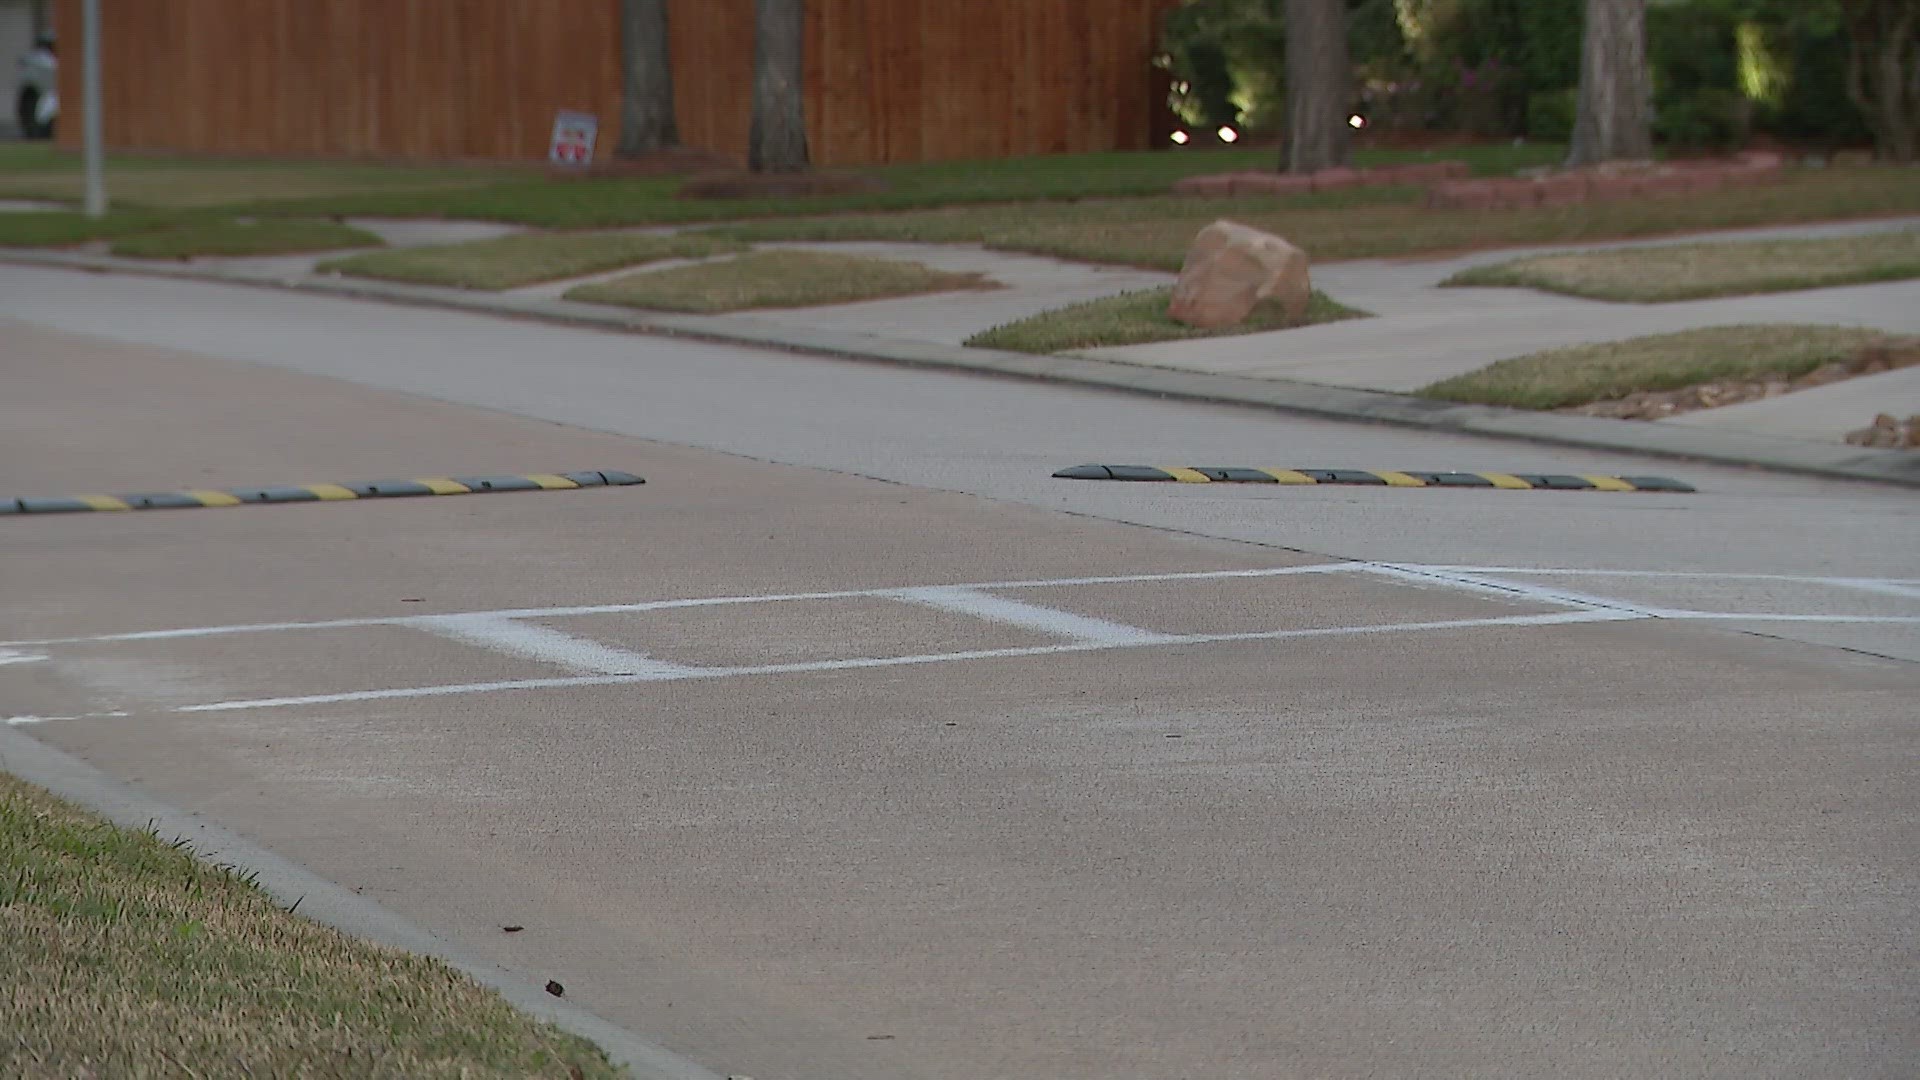 For the last two years, speedbumps have lined the streets of the Spring Lakes community. A new administration is looking to change that.